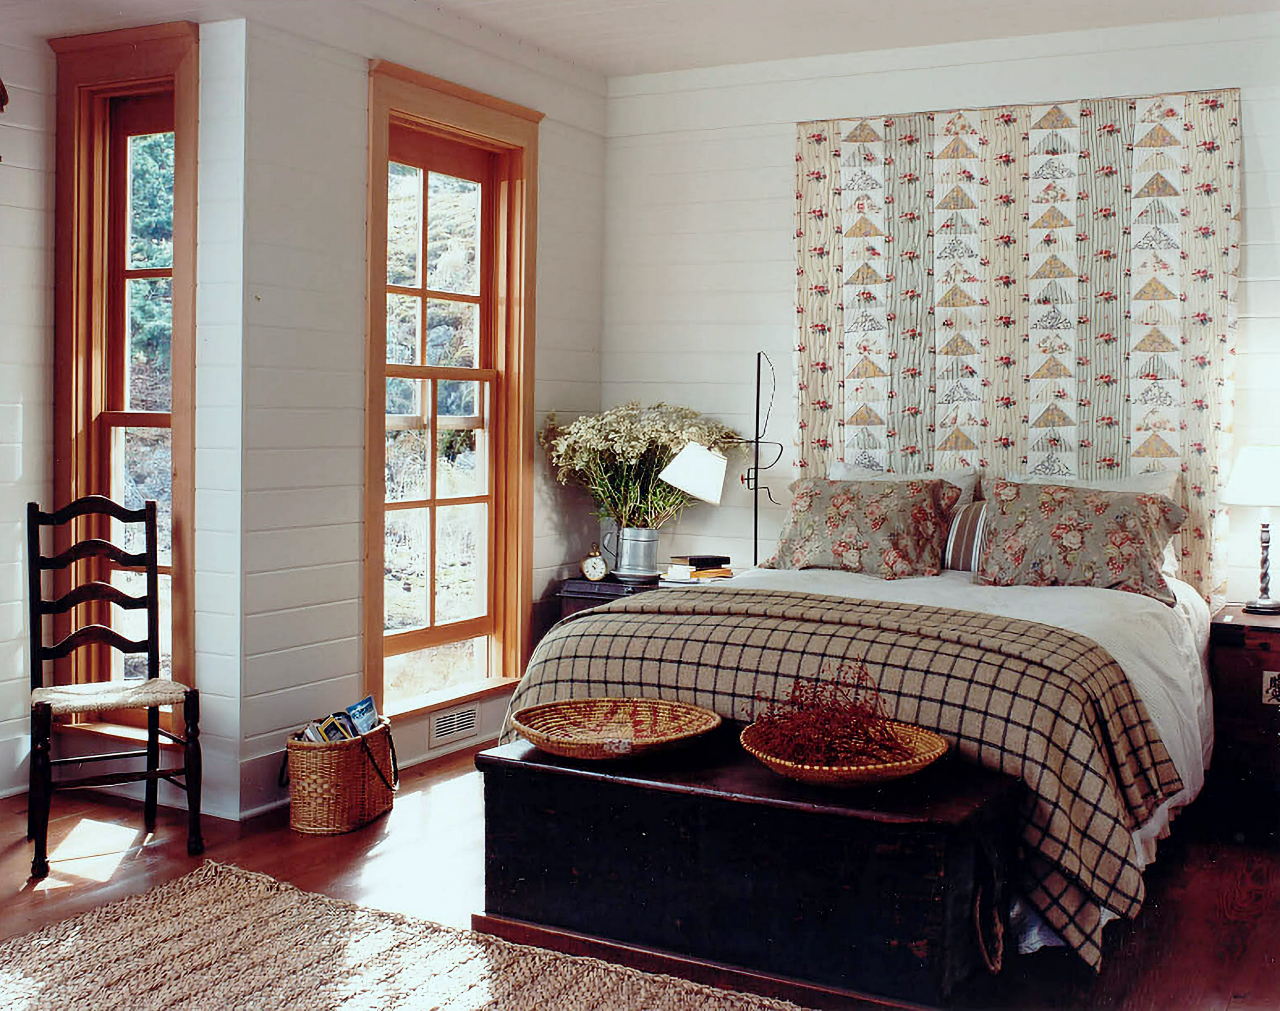 Fall-colored country style bedroom